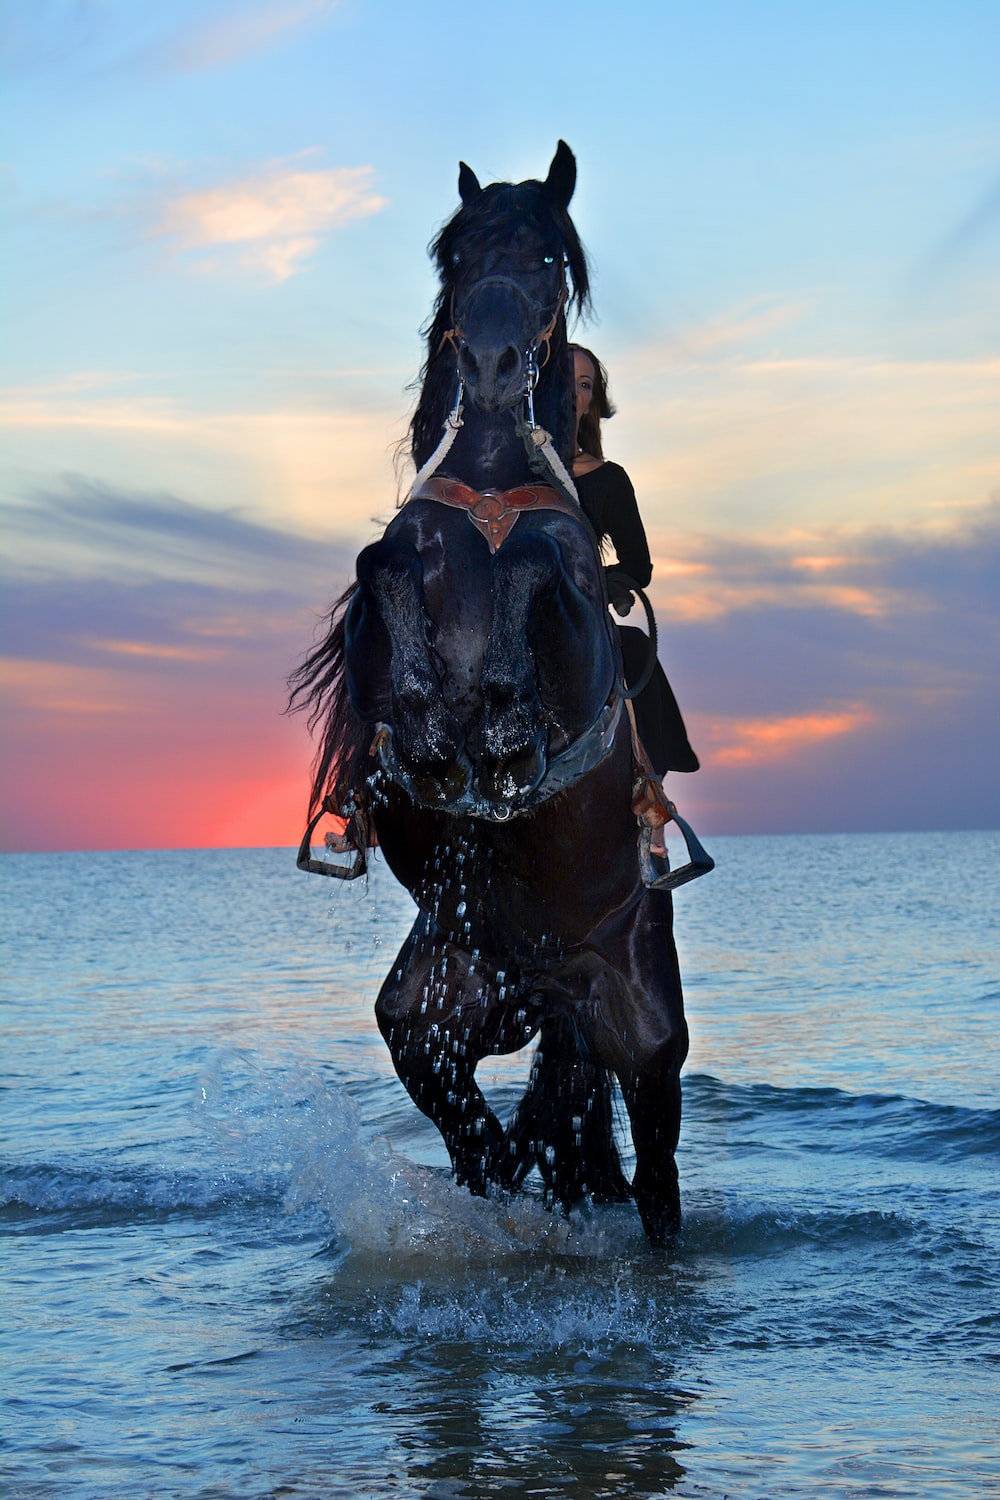 Black horse pictures hd download free images on